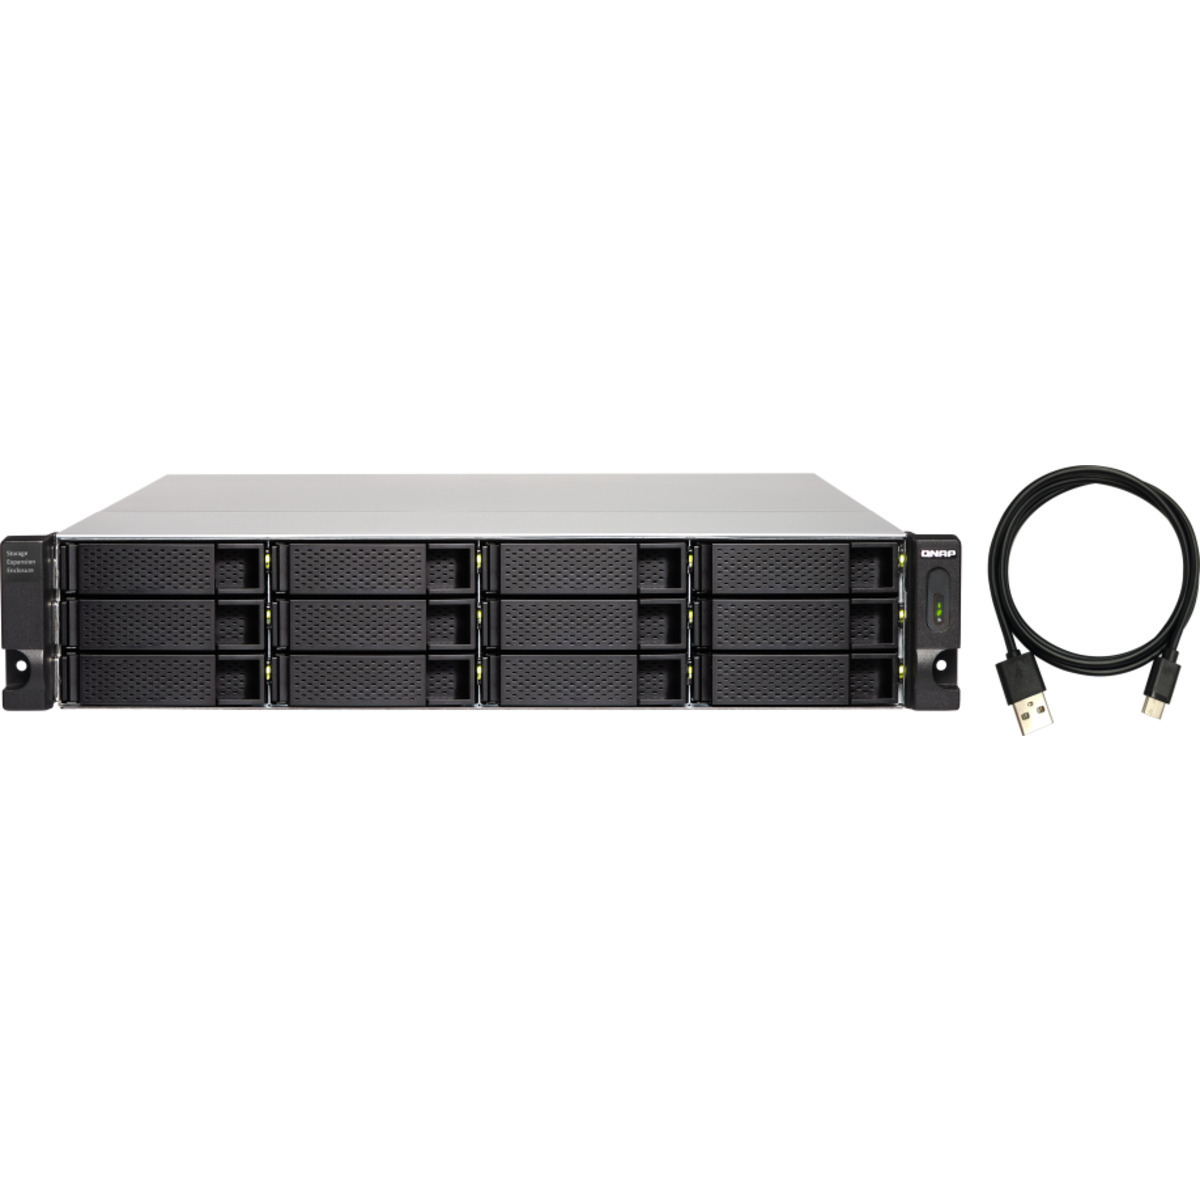 buy $5776 QNAP TL-R1200C-RP External Expansion Drive 240tb RackMount Expansion Enclosure 12x20000gb Seagate EXOS X20 ST20000NM007D 3.5 7200rpm SATA 6Gb/s HDD ENTERPRISE Class Drives Installed - Burn-In Tested - nas headquarters buy network attached storage server device das new raid-5 free shipping simply usa TL-R1200C-RP External Expansion Drive